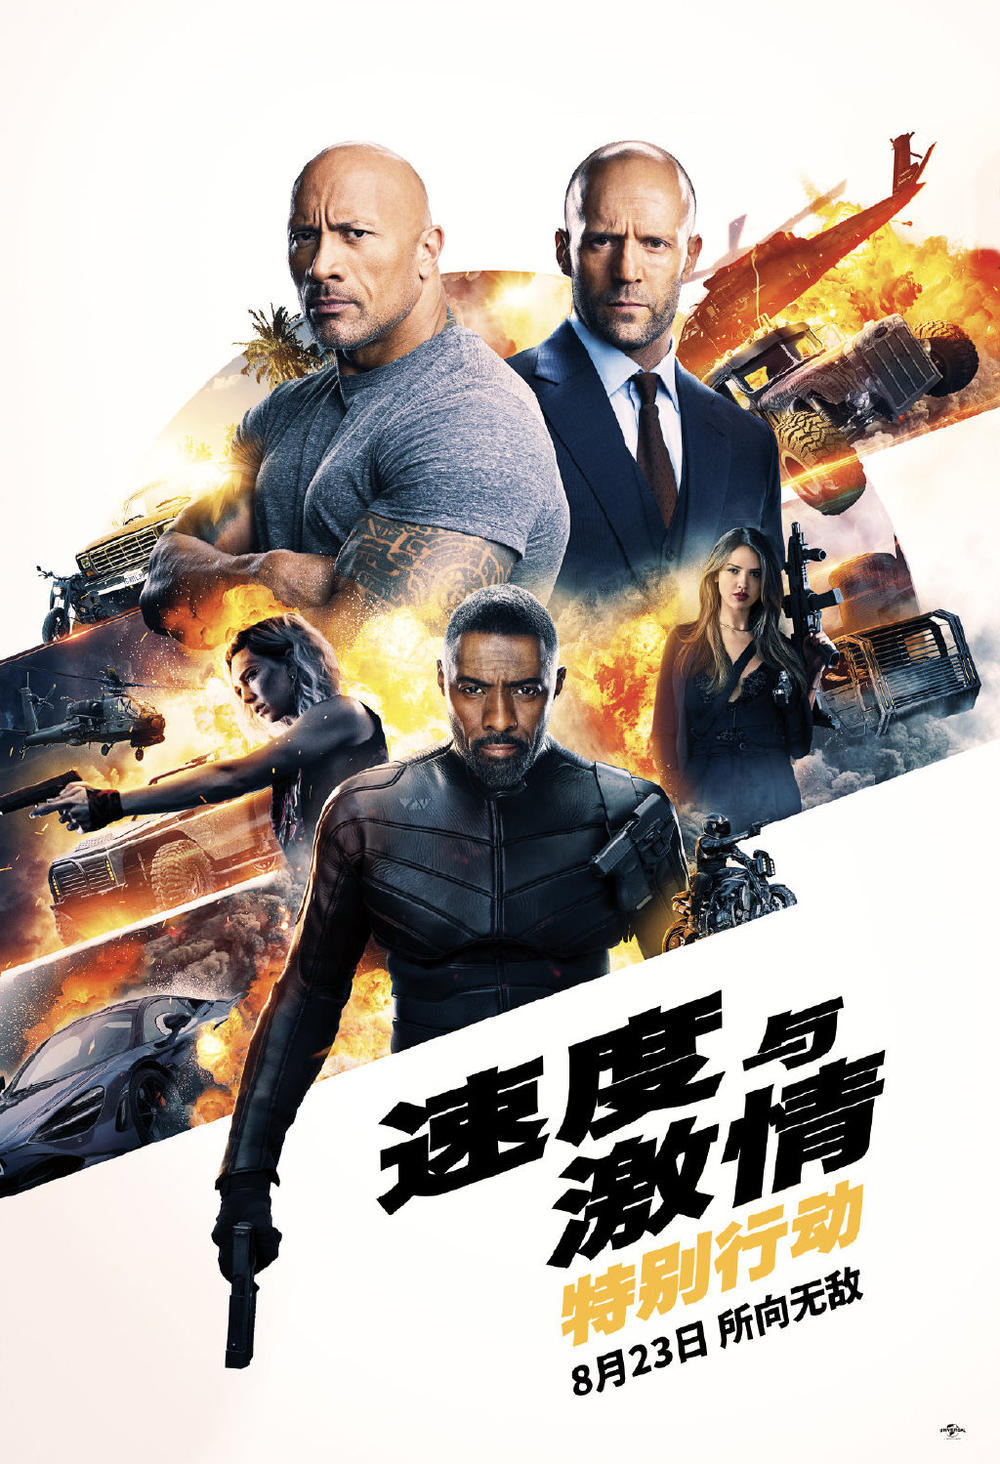 Extra Large Movie Poster Image for Hobbs & Shaw (#7 of 13)